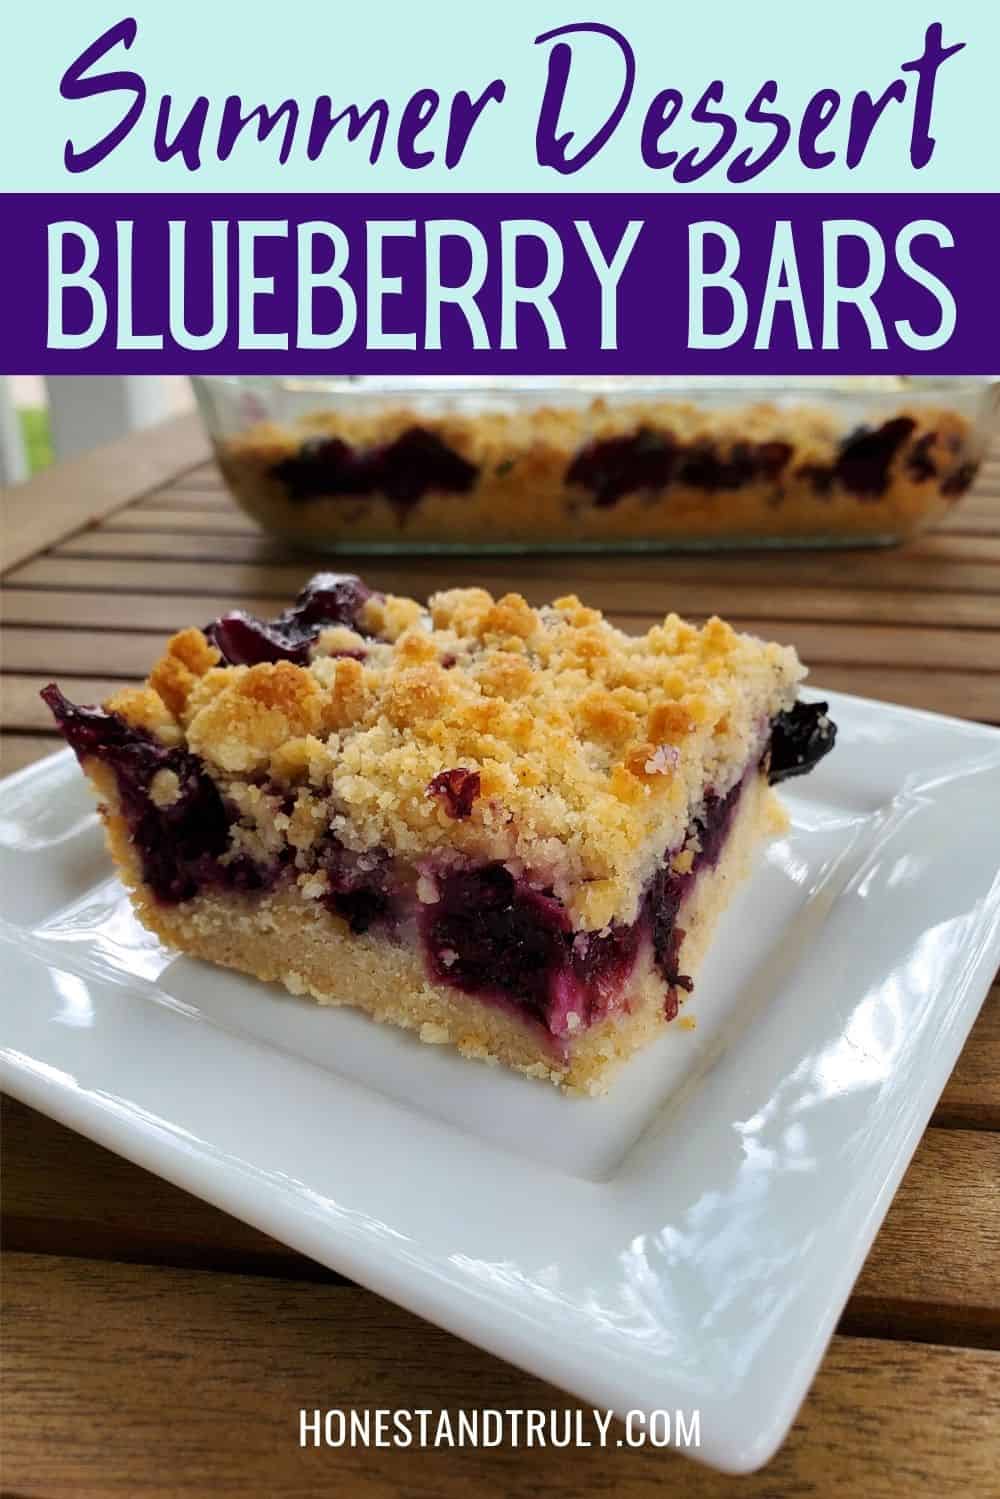 Blueberry streusel bars on a plate on a wooden table outside.